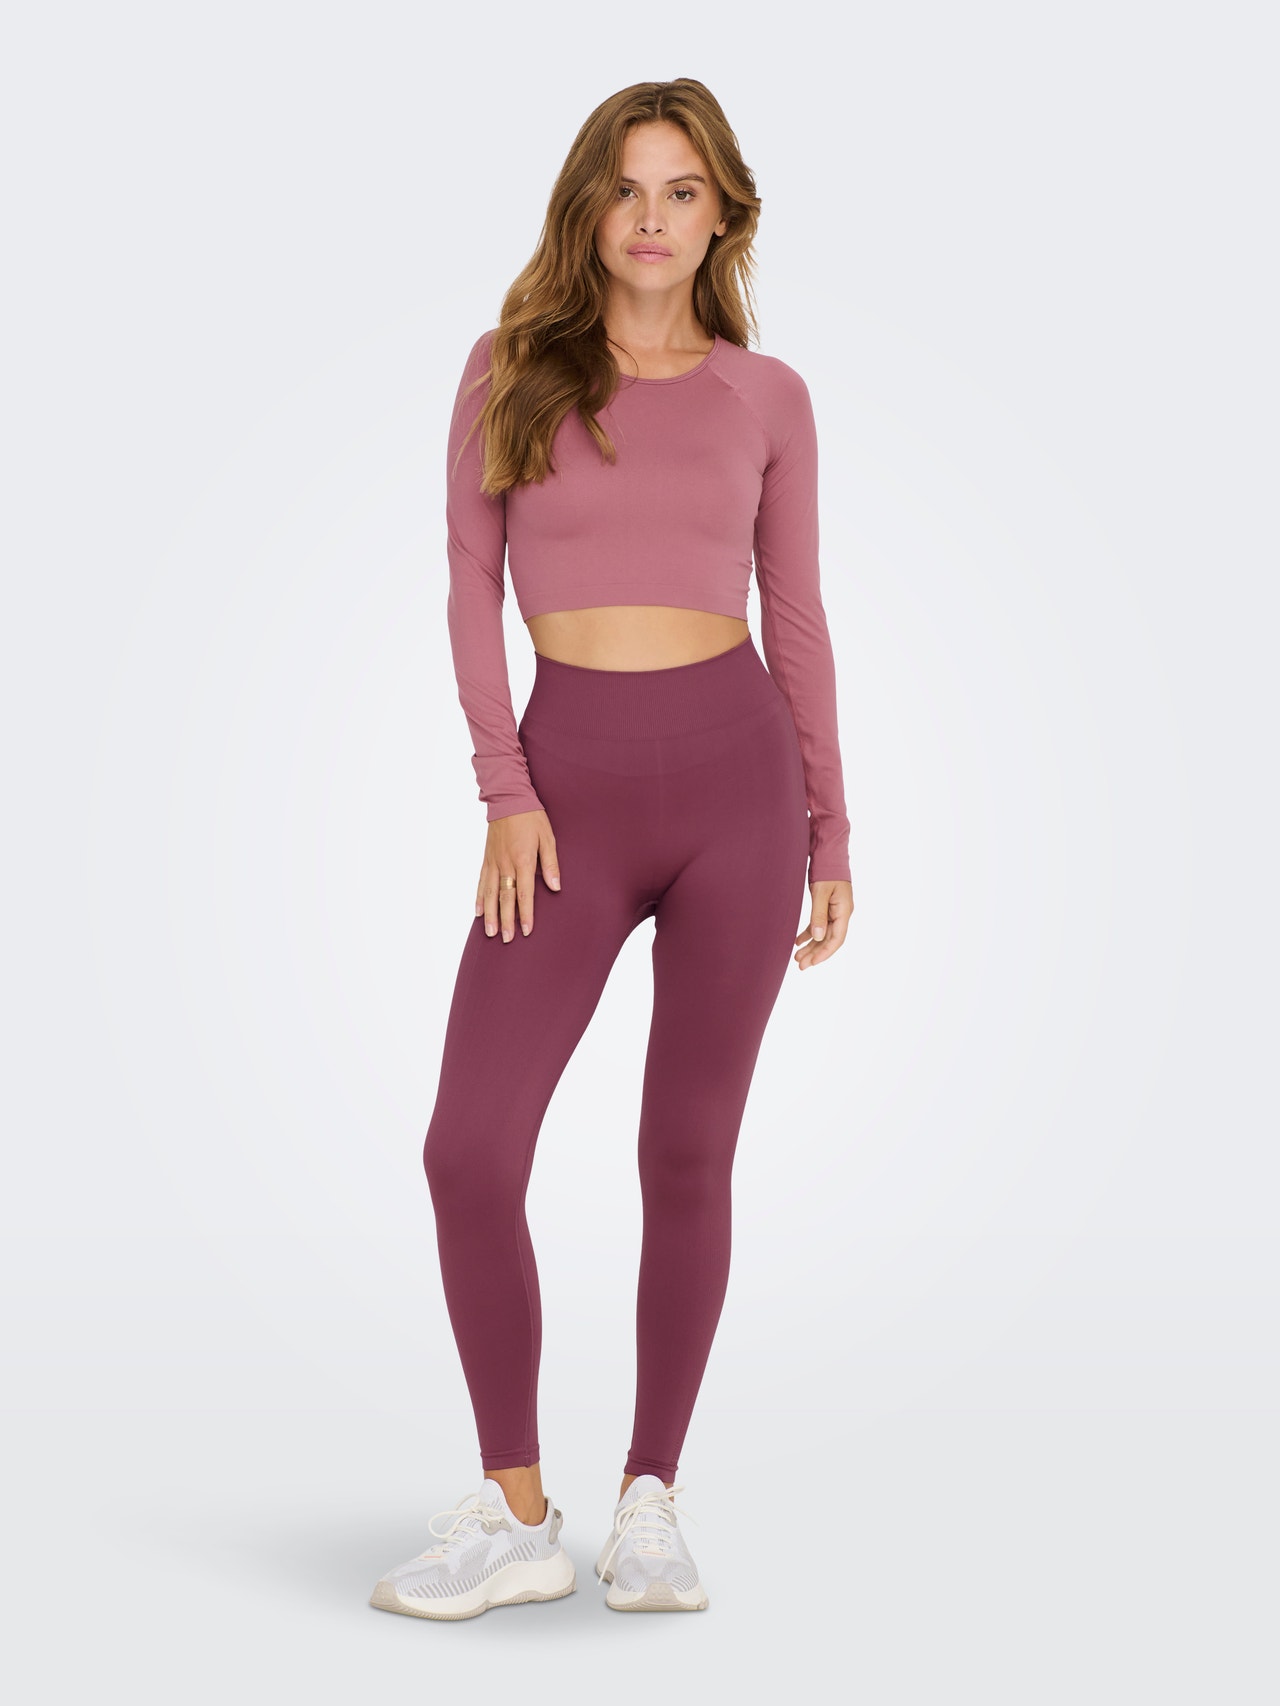 ONLY Leggings Tight Fit Taille haute -Crushed Berry - 15284448